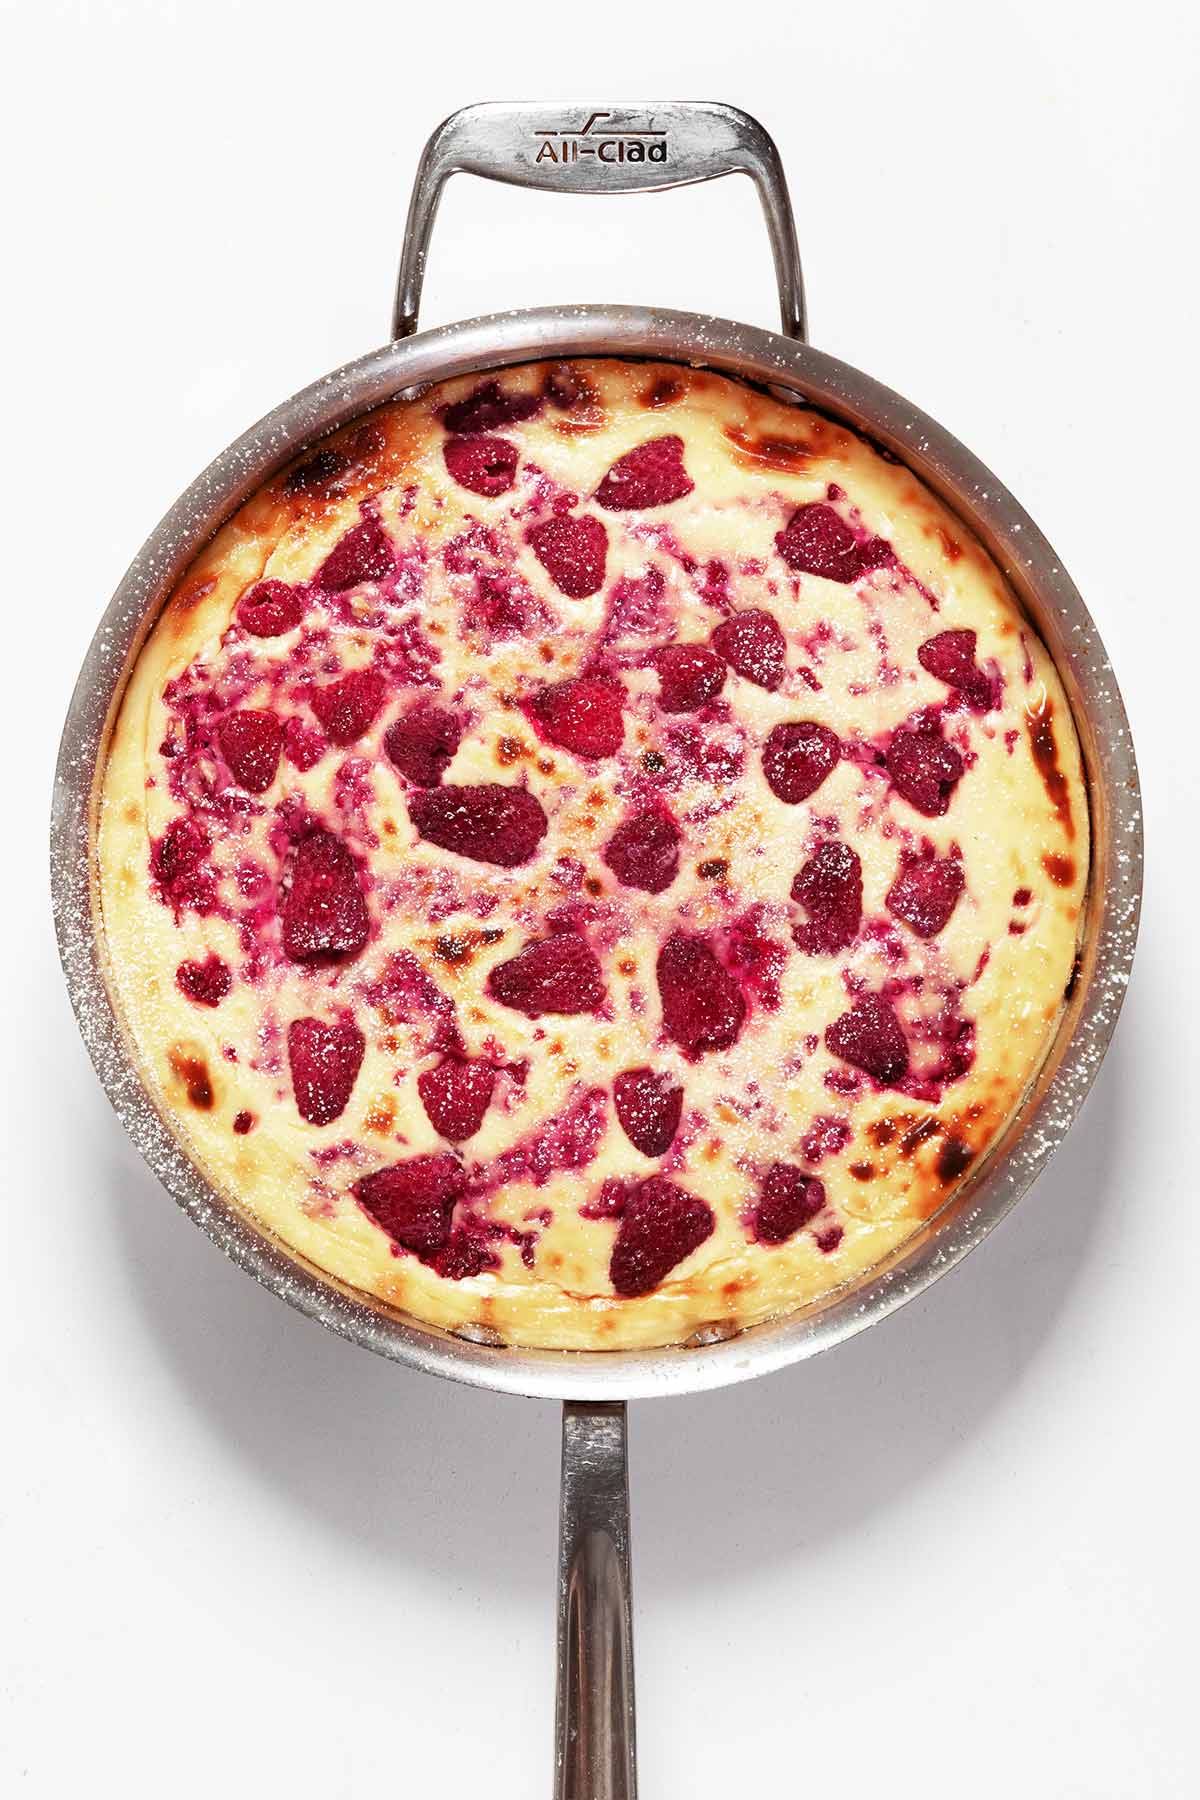 A baked lemon cheesecake topped with raspberries in a metal skillet.